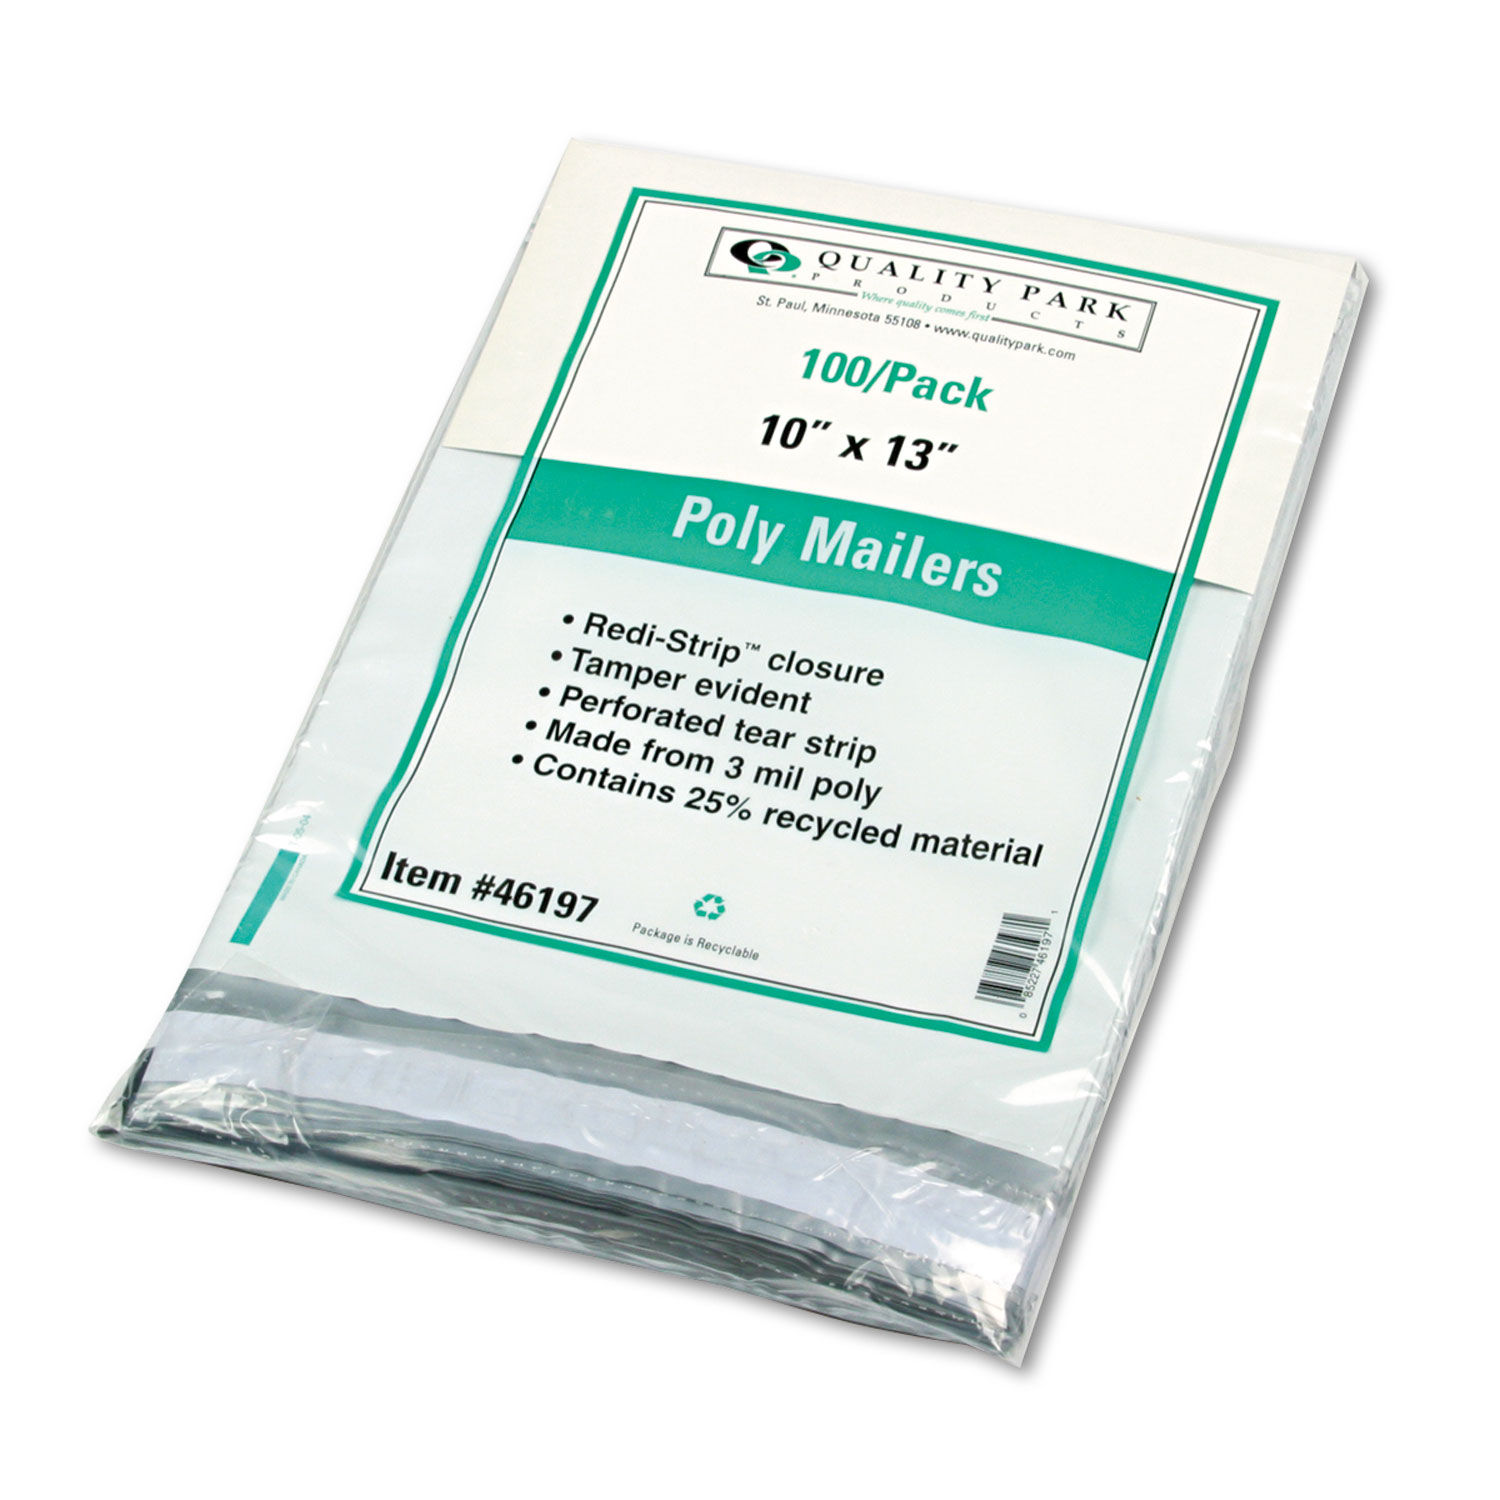 Redi-Strip Poly Mailer #4, Square Flap with Perforated Strip, Redi-Strip Adhesive Closure, 10 x 13, White, 100/Pack